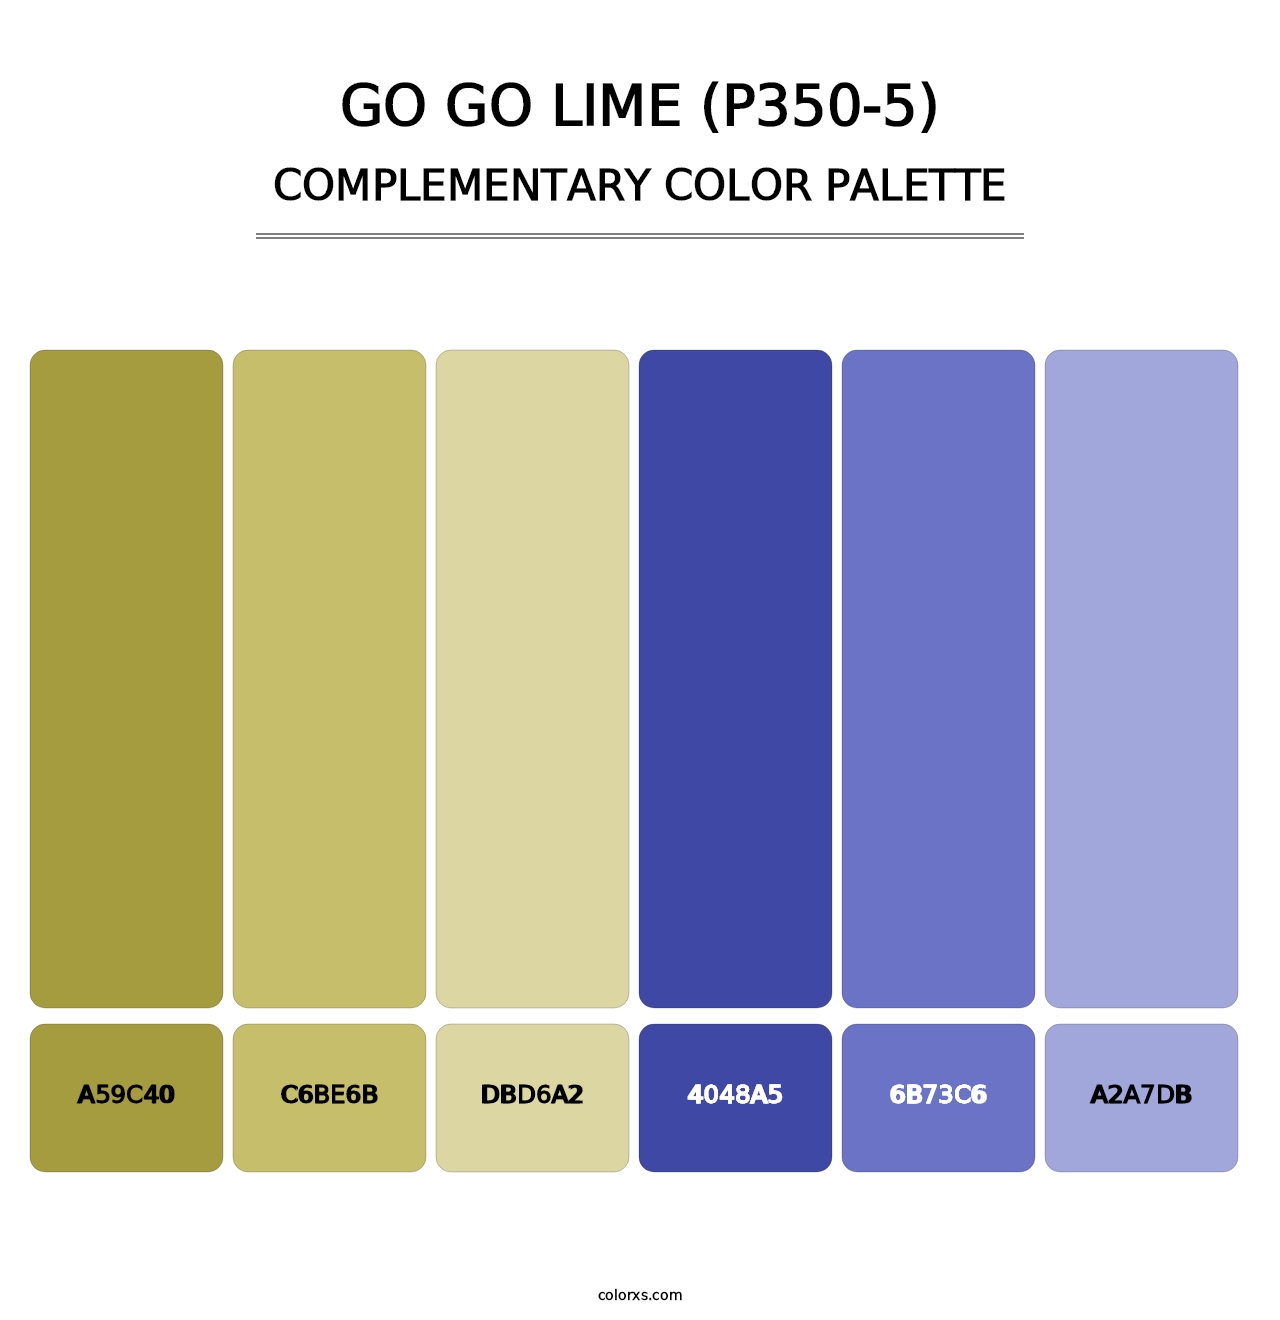 Go Go Lime (P350-5) - Complementary Color Palette